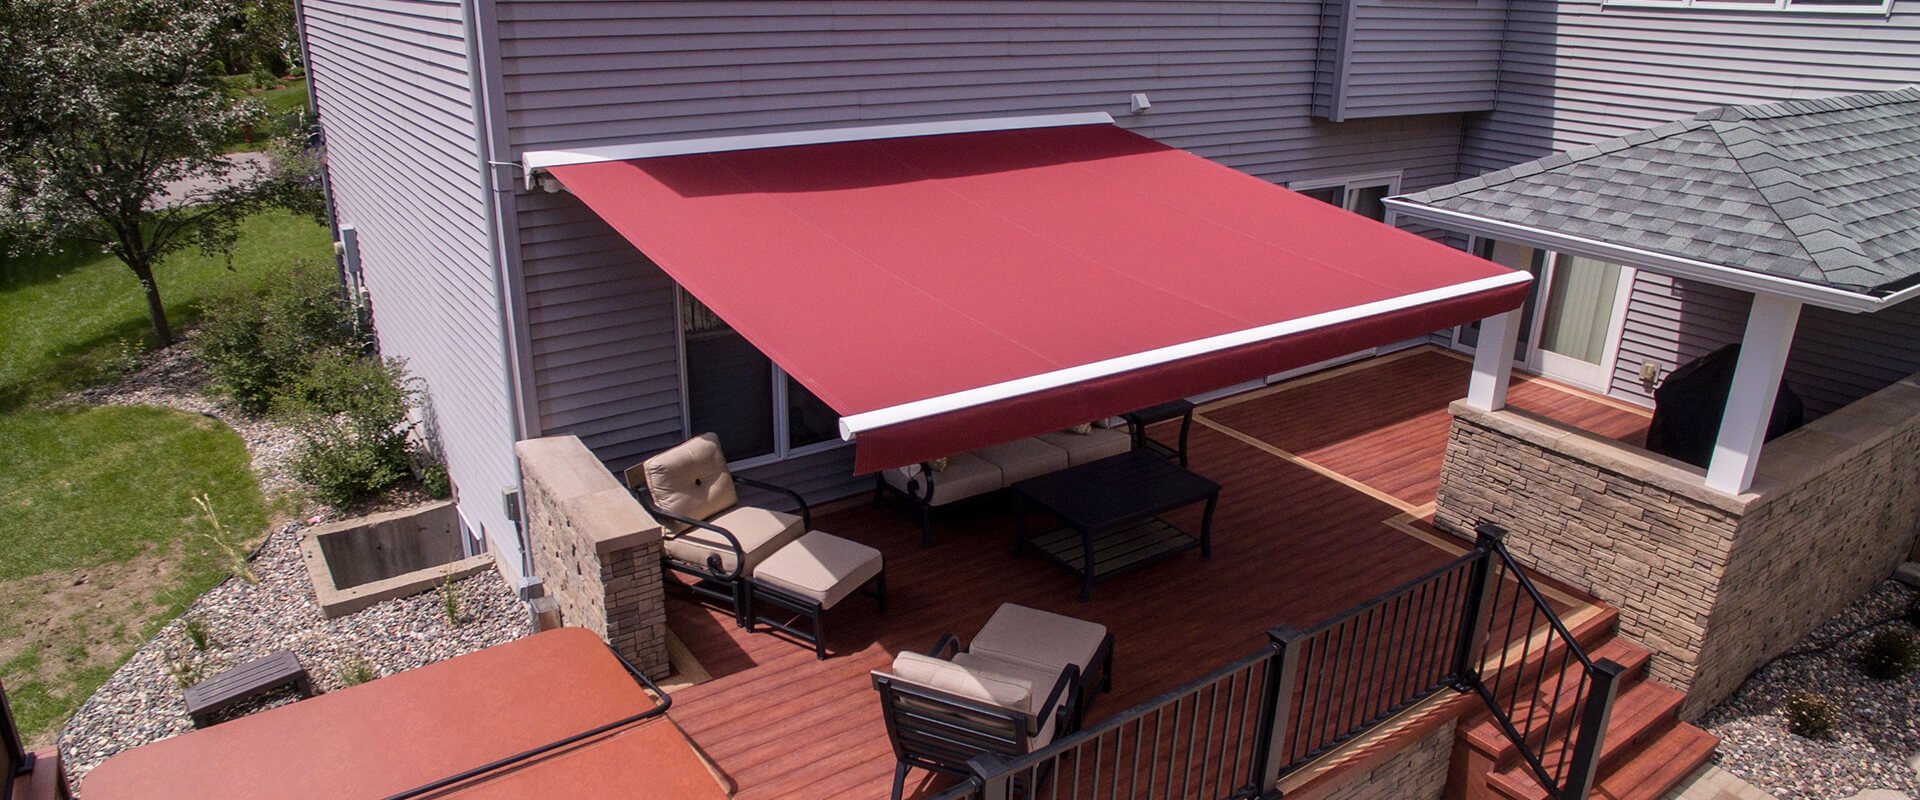 How To Clean Your Retractable Awnings